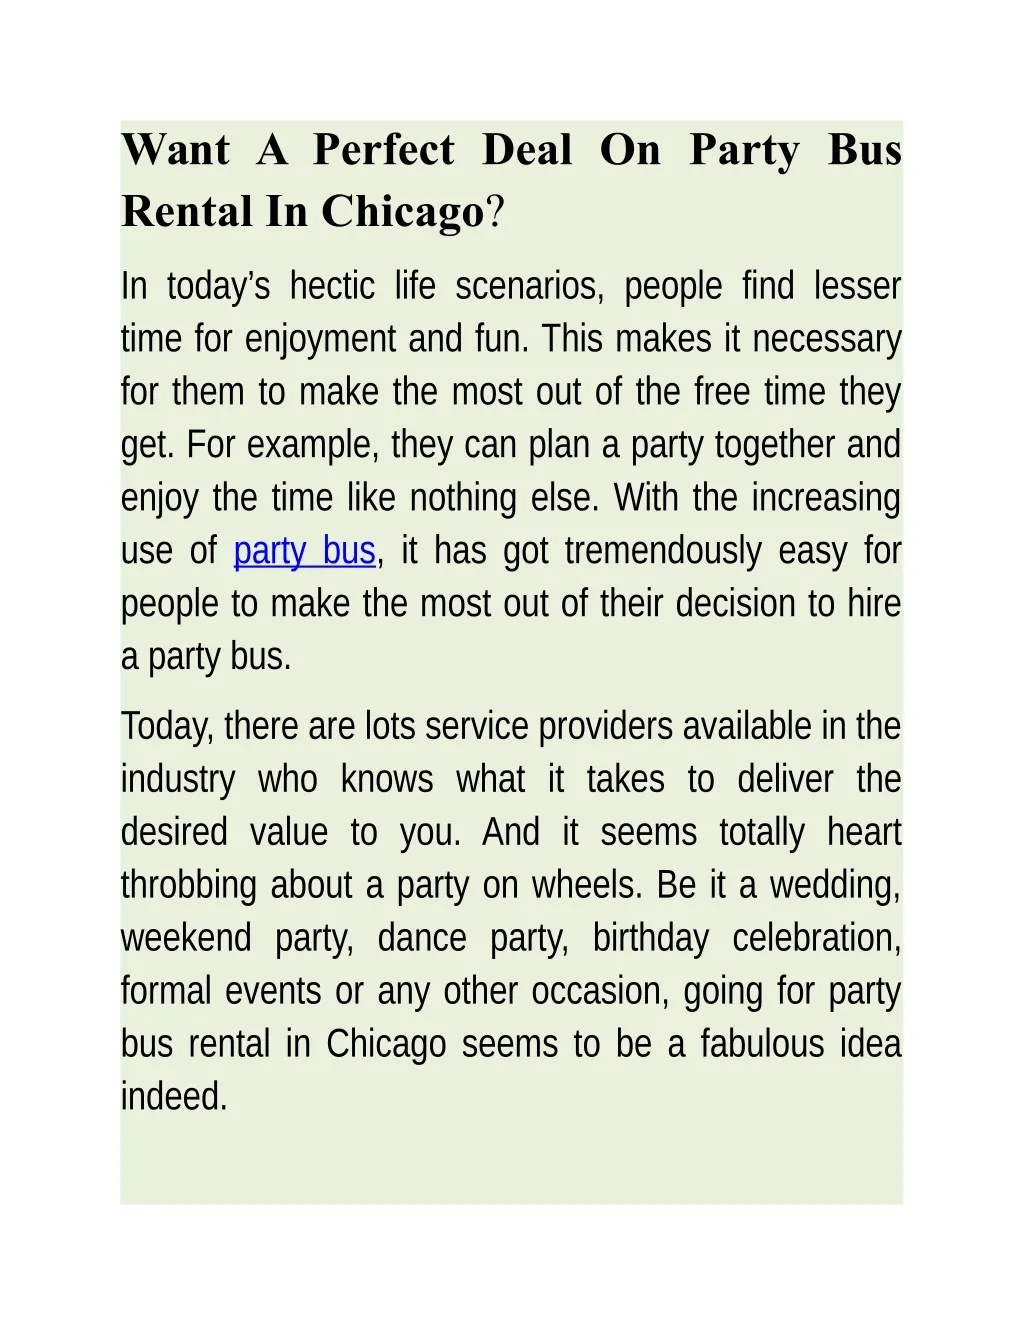 want a perfect deal on party bus rental in chicago